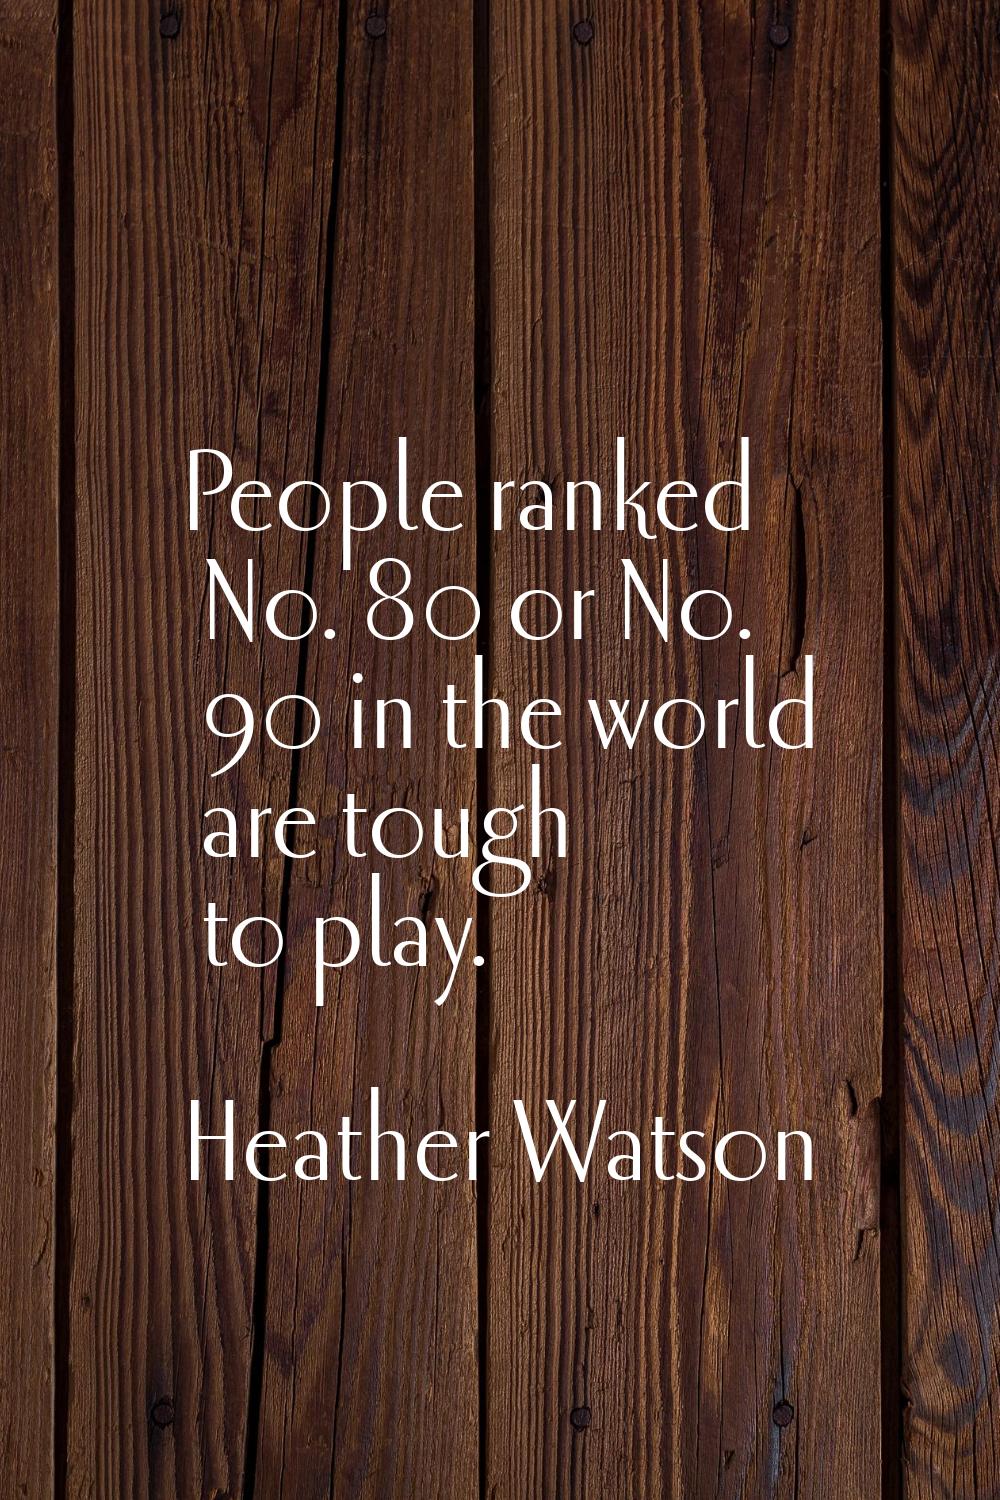 People ranked No. 80 or No. 90 in the world are tough to play.